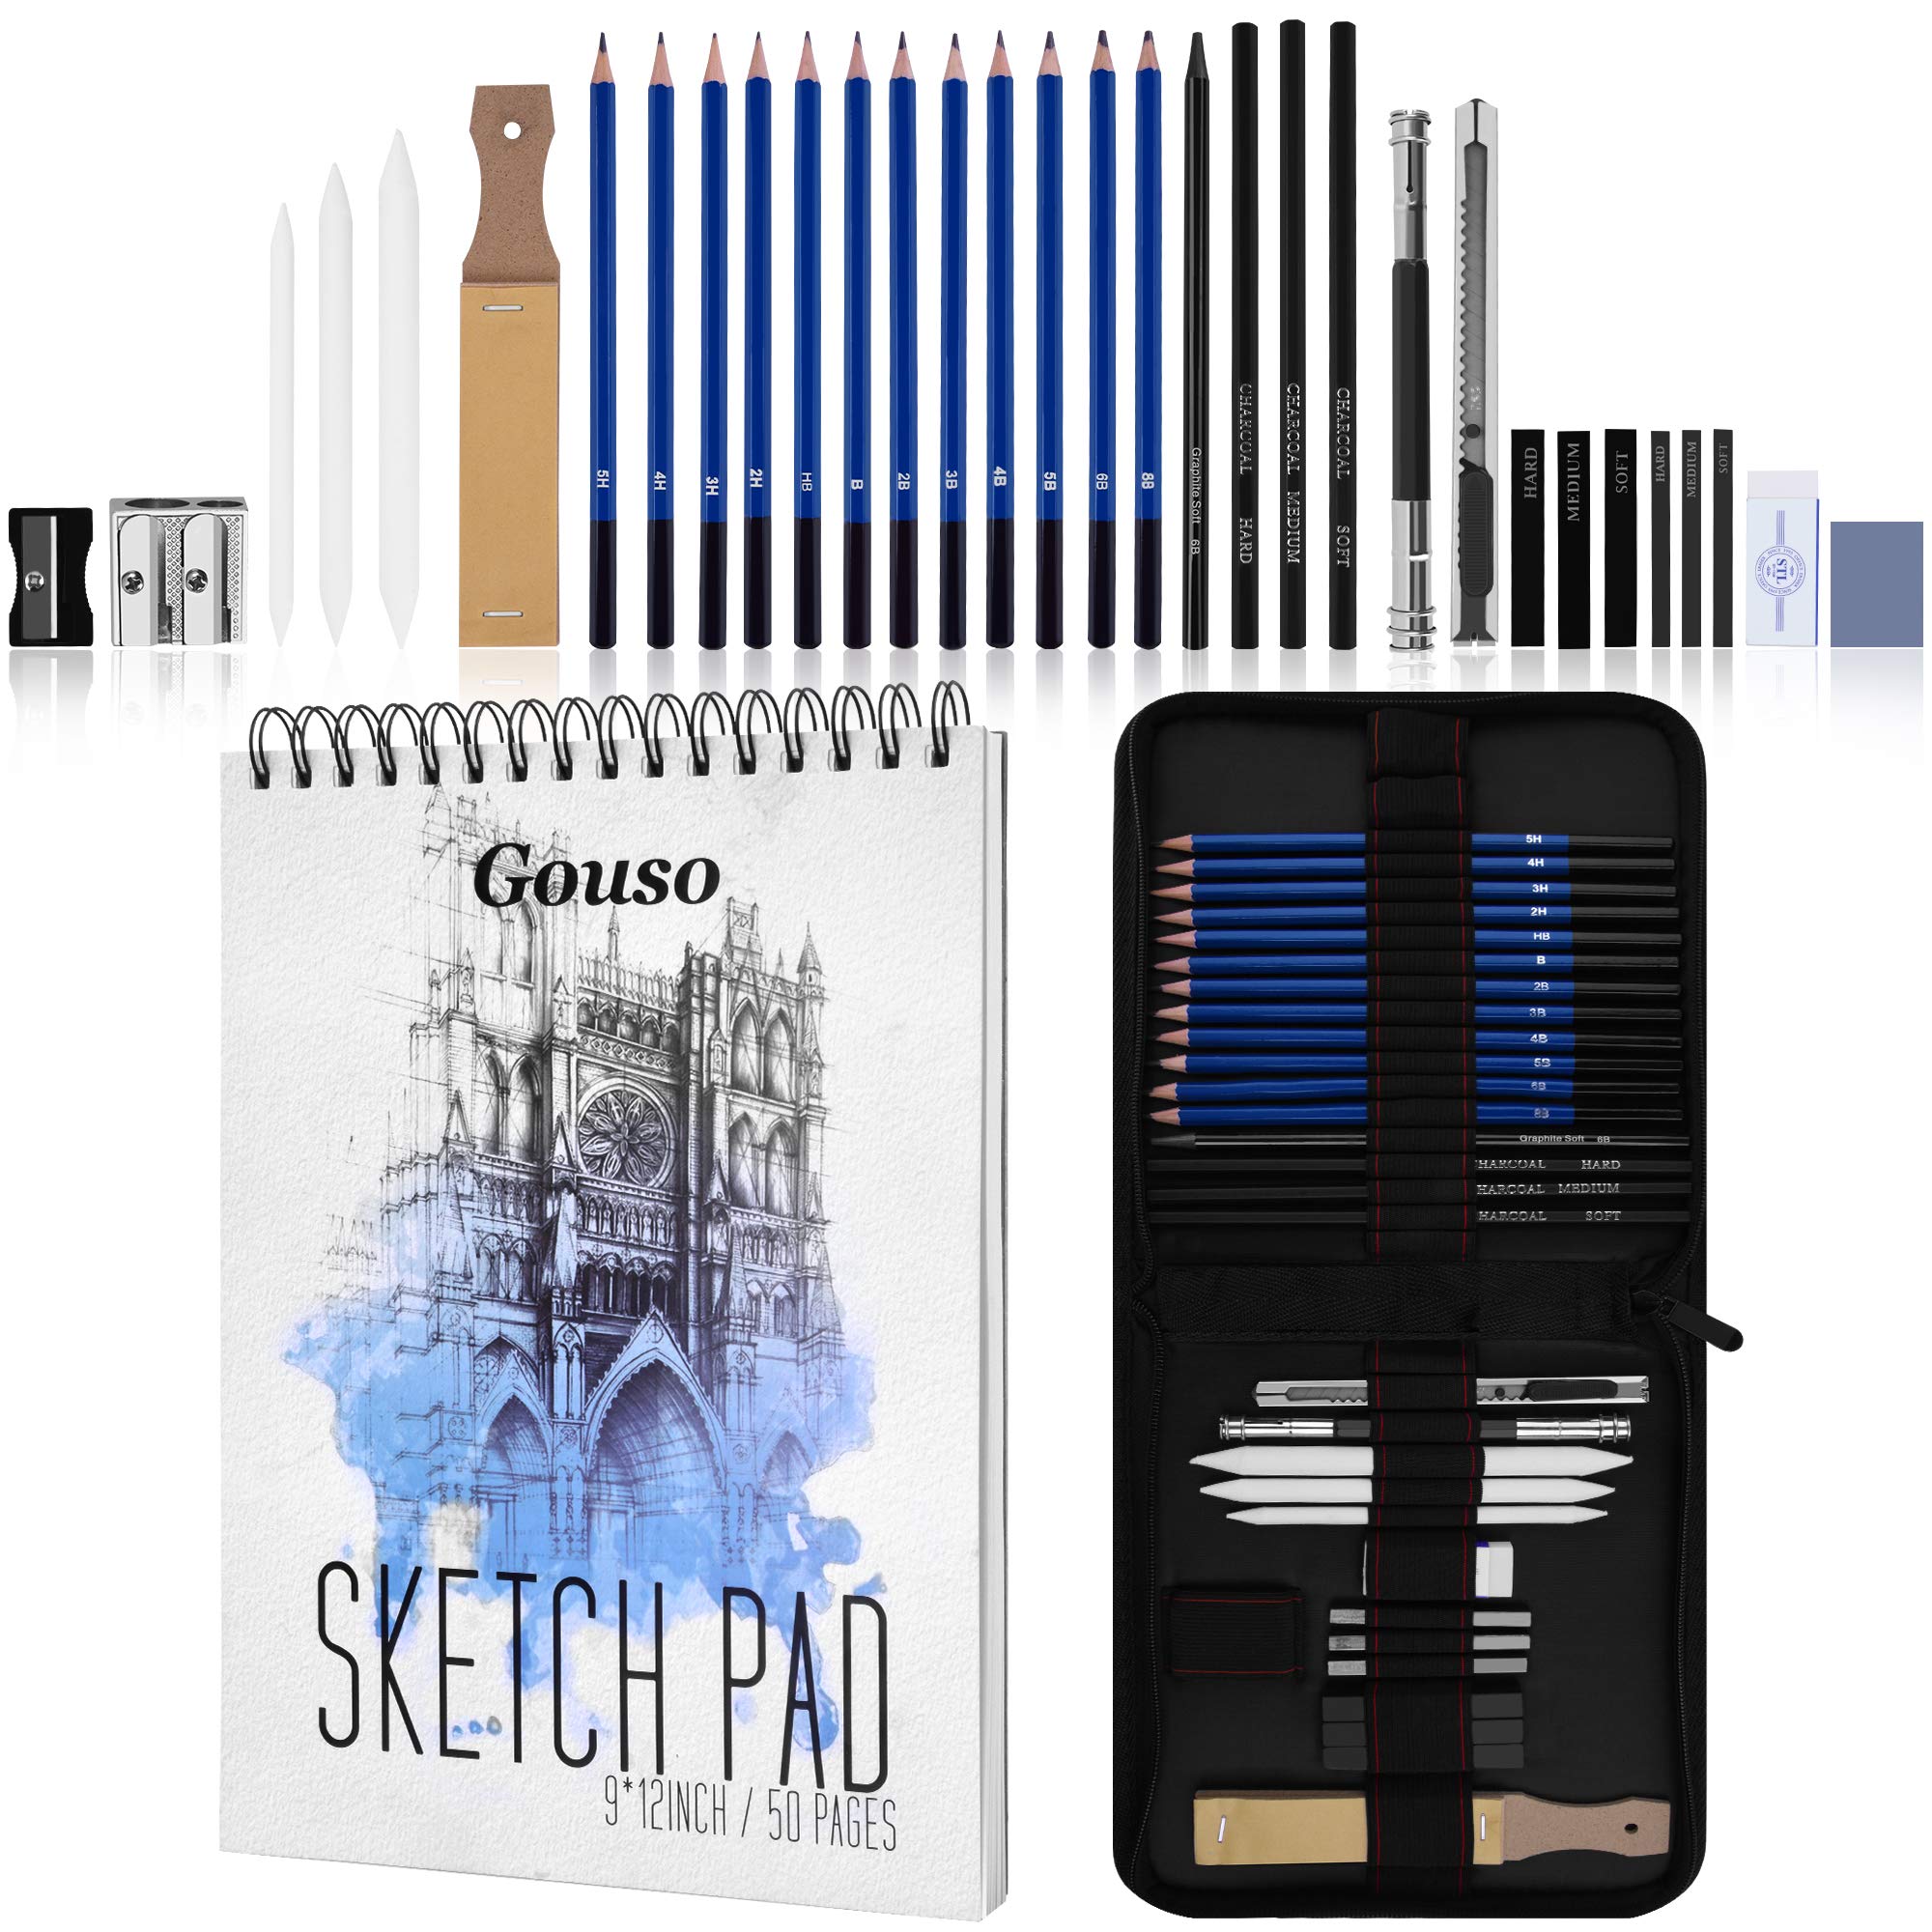 Sketch and Drawing Art Pencil Kit 19 Piece Set Sketch & Charcoal